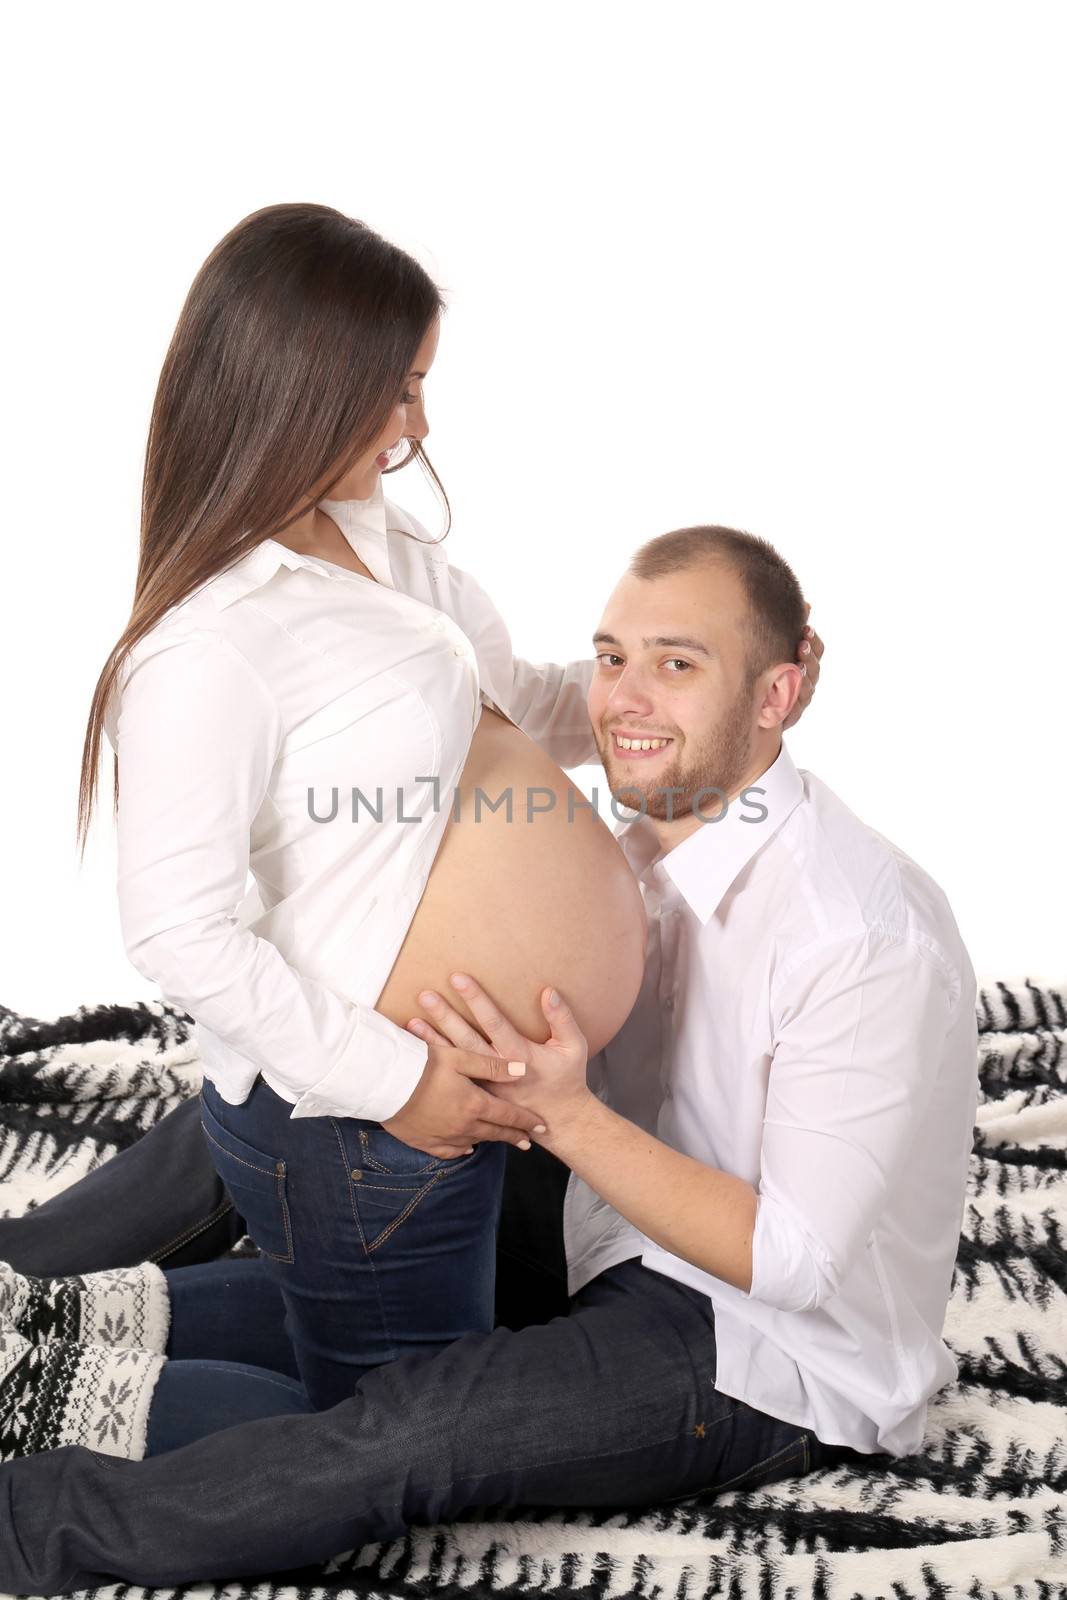 Happy men smiling with pregnant woman. Isolated on a white background.